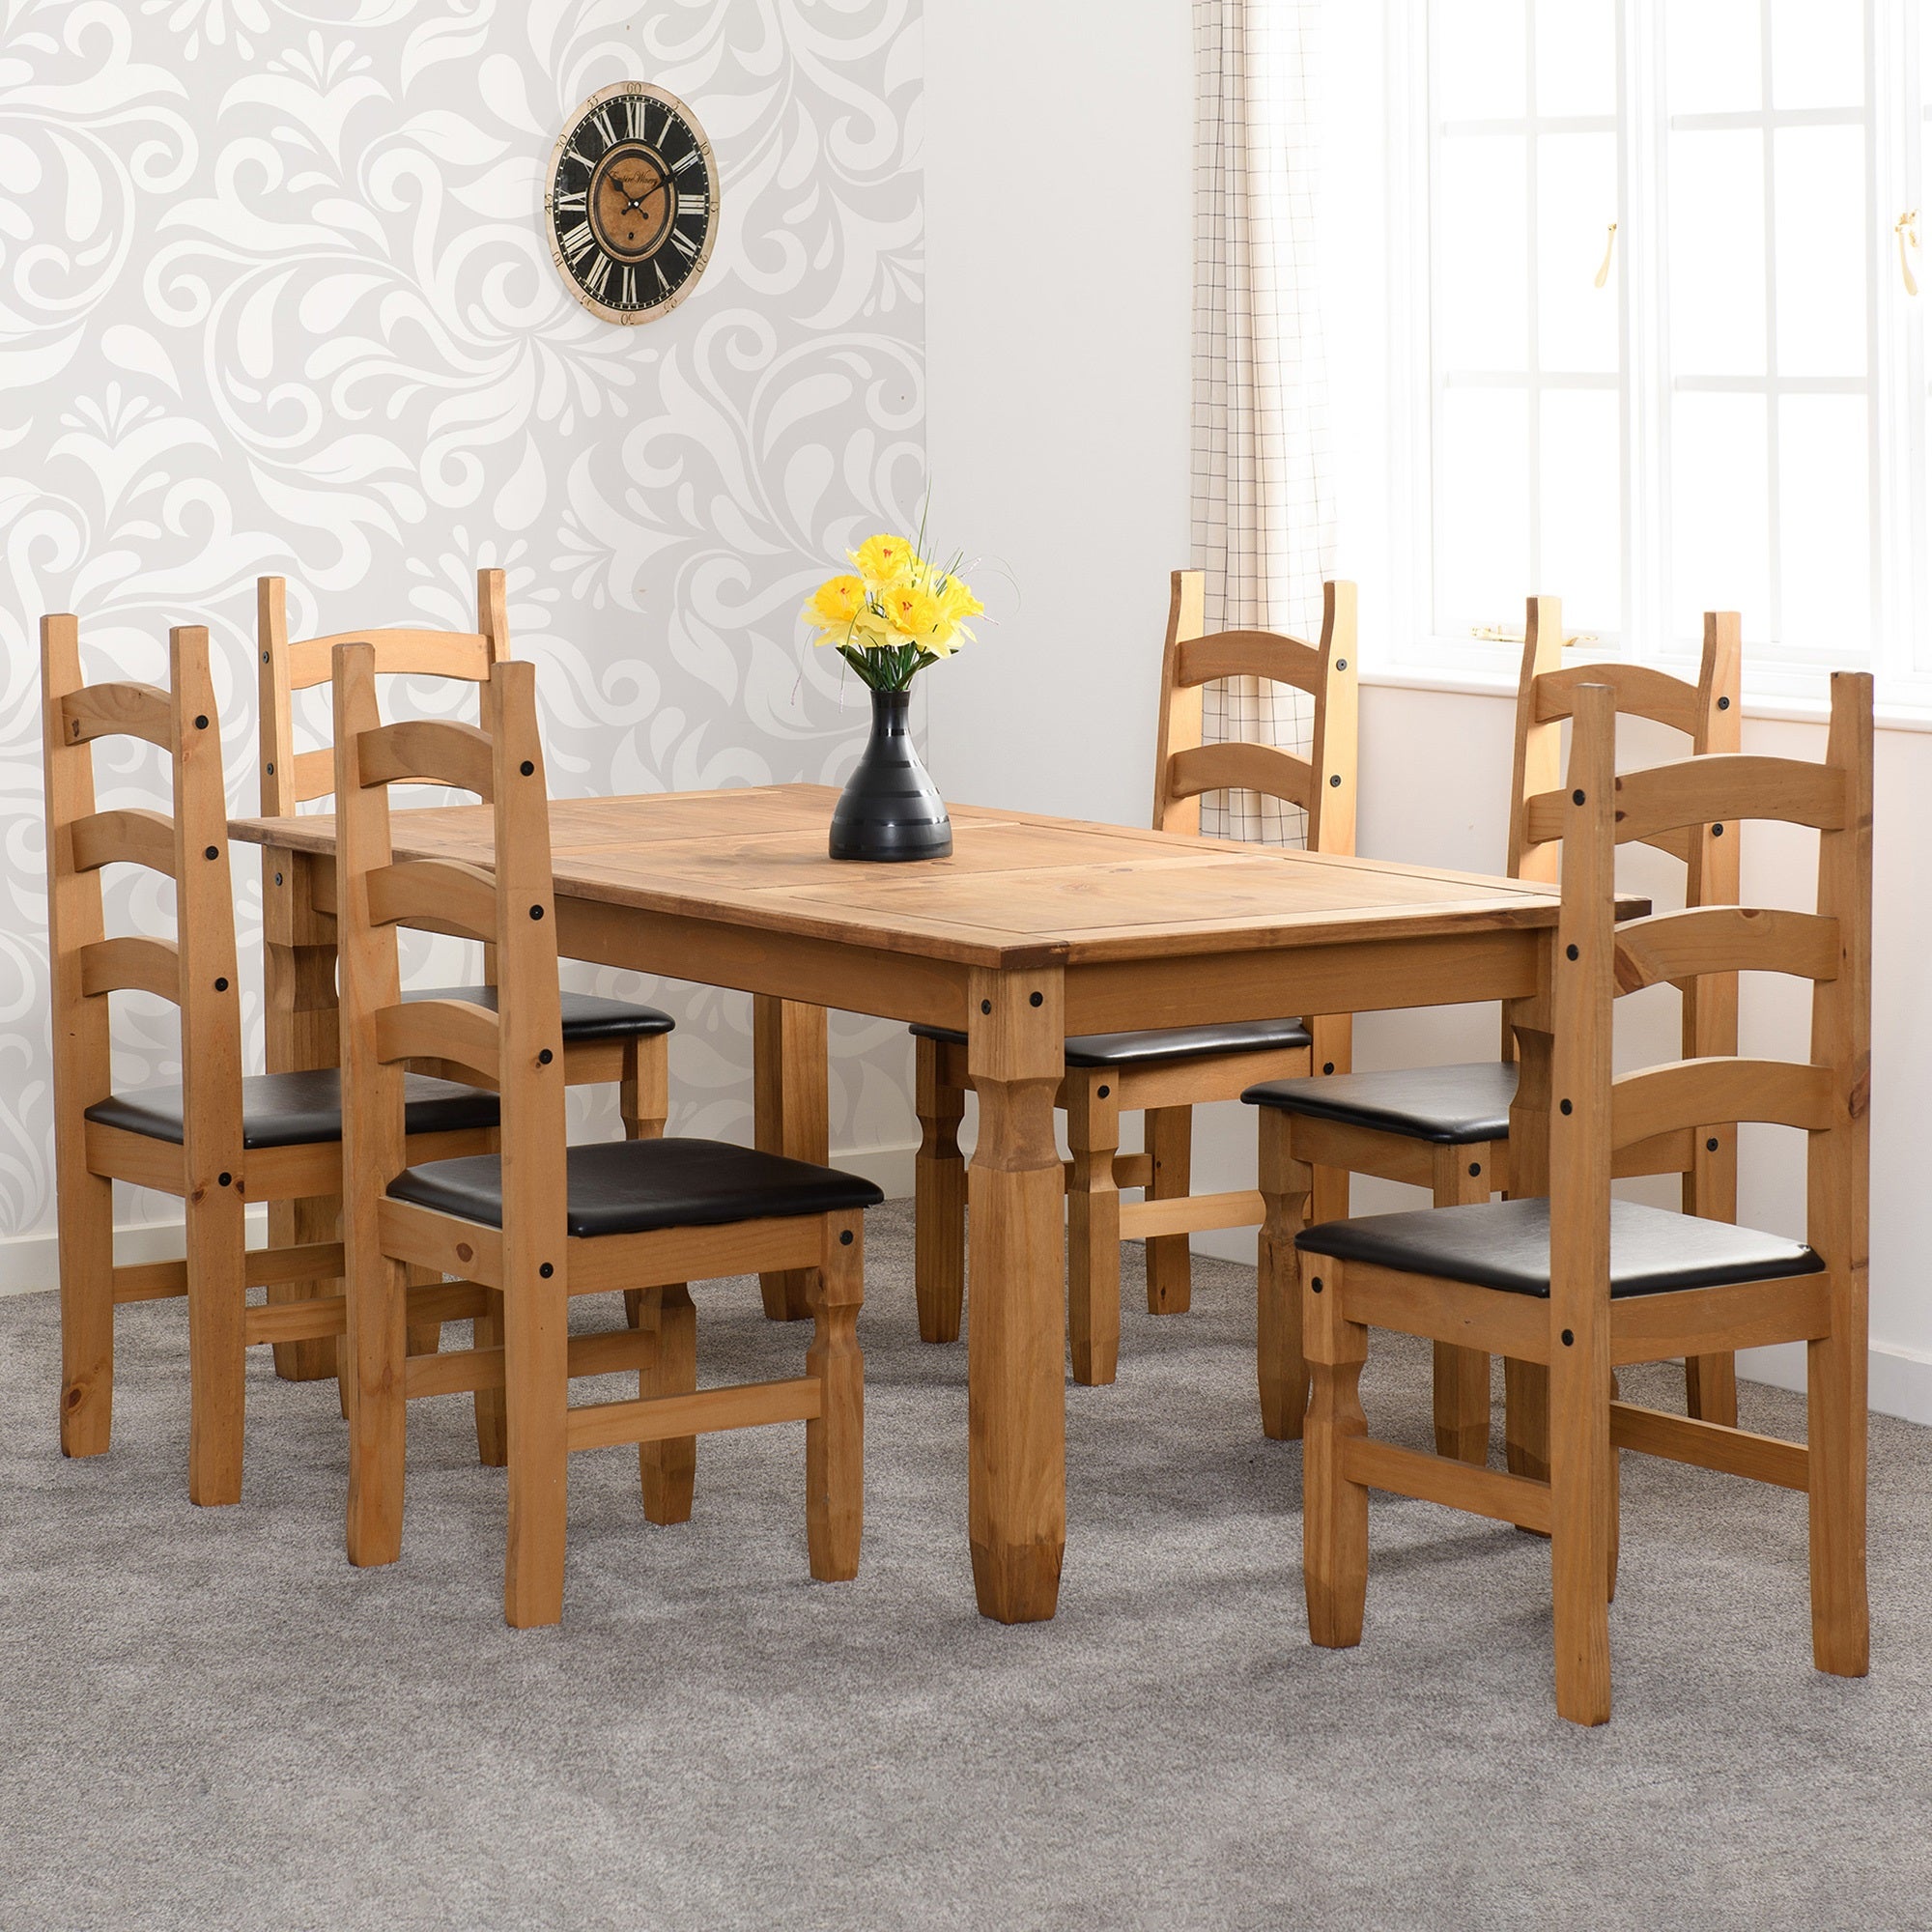 Corona Rectangular Dining Table with 6 Chairs, Pine Brown